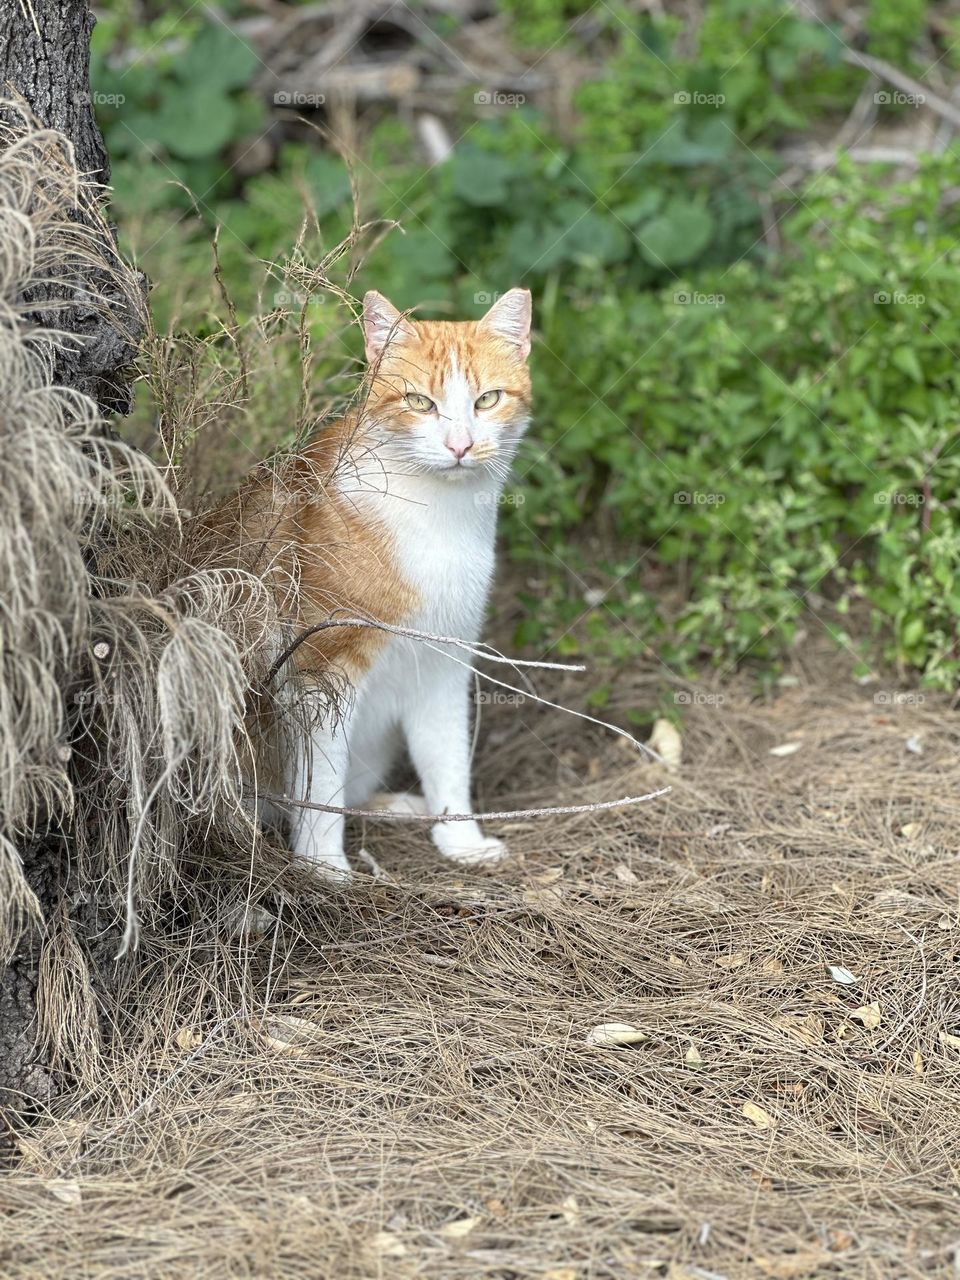 A white and orange short hair cat sitting among green plants staring directly at me